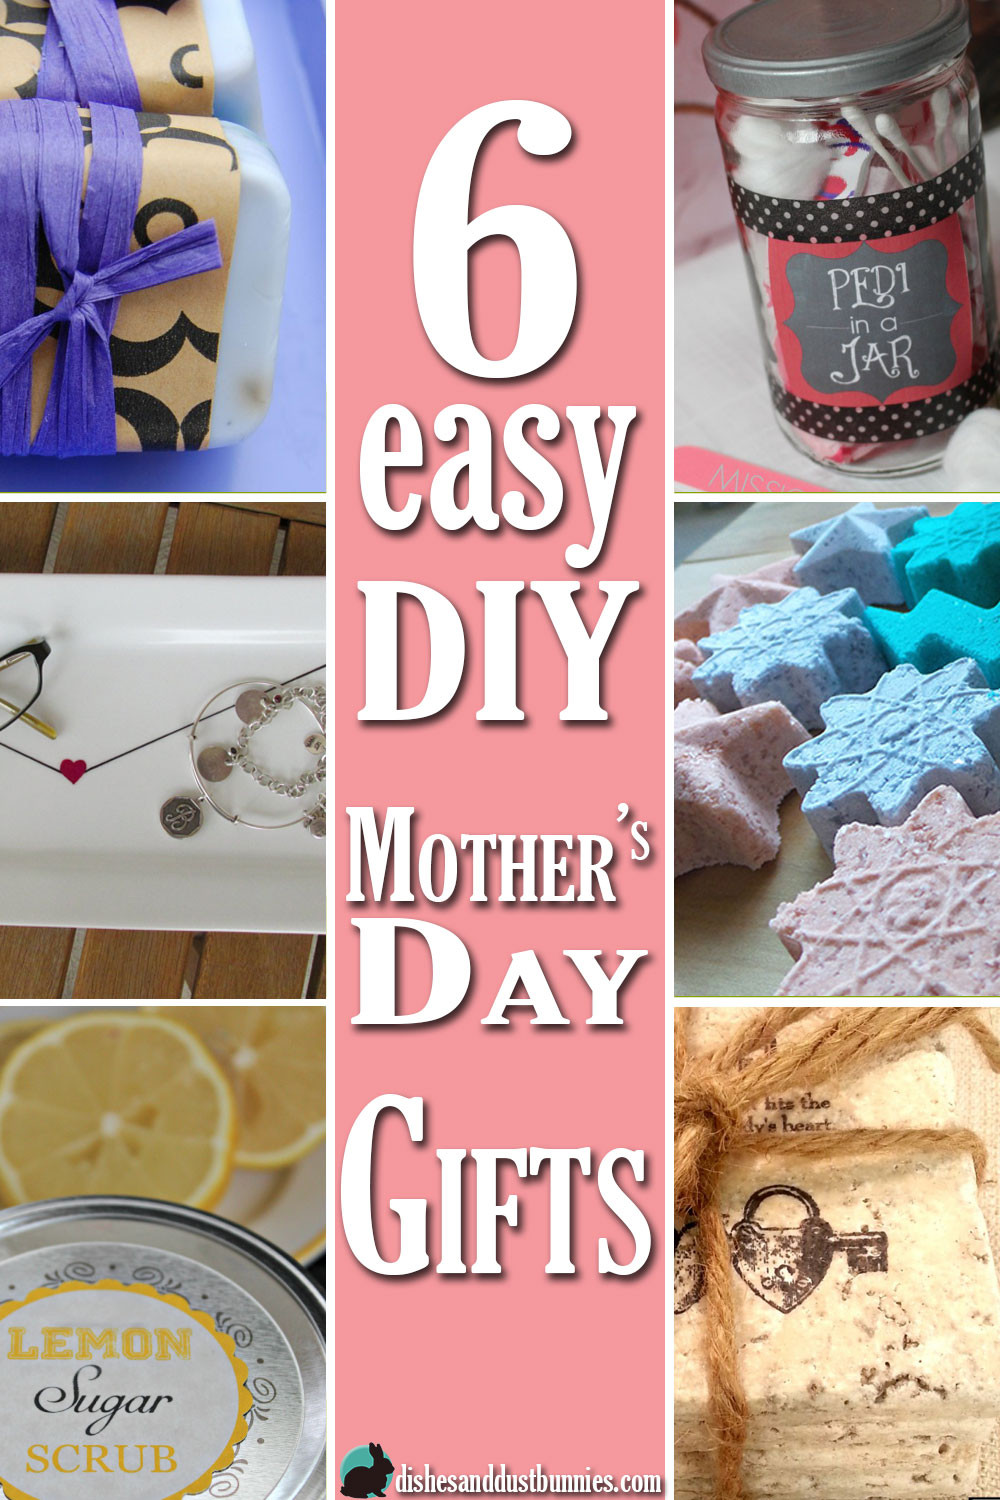 Mother'S Day Gift Ideas For Church
 6 Easy DIY Mother s Day Gifts Dishes and Dust Bunnies